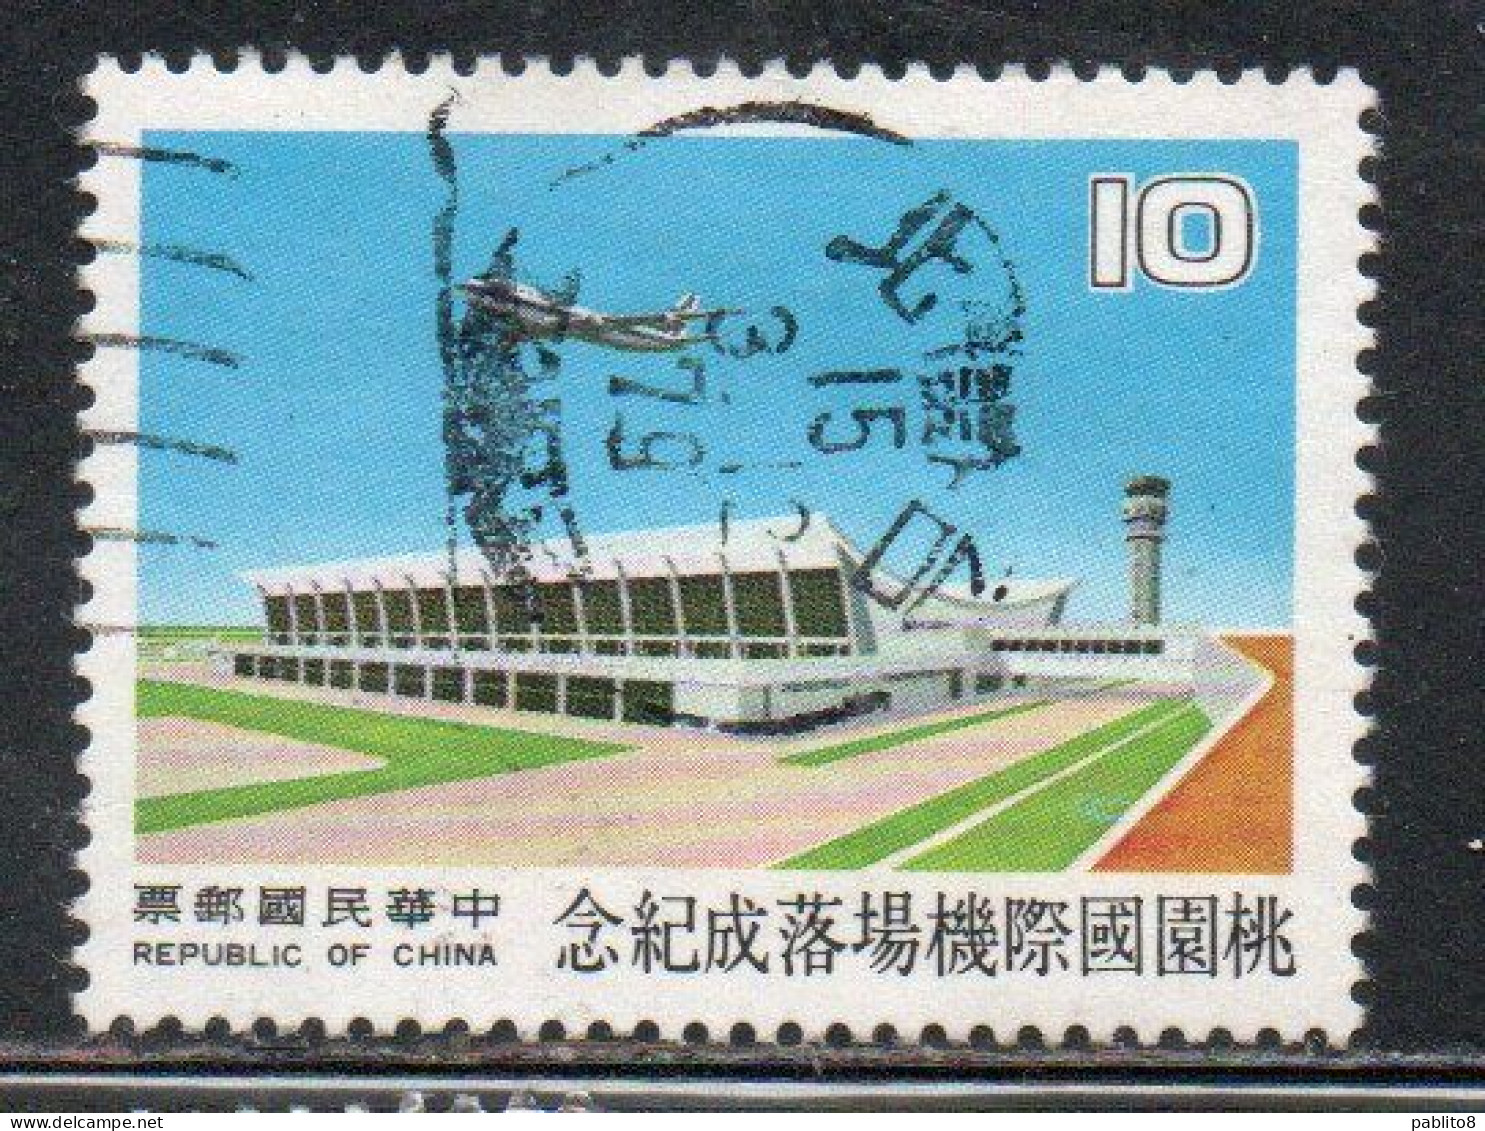 CHINA REPUBLIC CINA TAIWAN FORMOSA 1978 TAOYUAN AIRPORT PASSENGER TERMINAL CONTROL TOWER 10$ USED USATO OBLITERE - Used Stamps